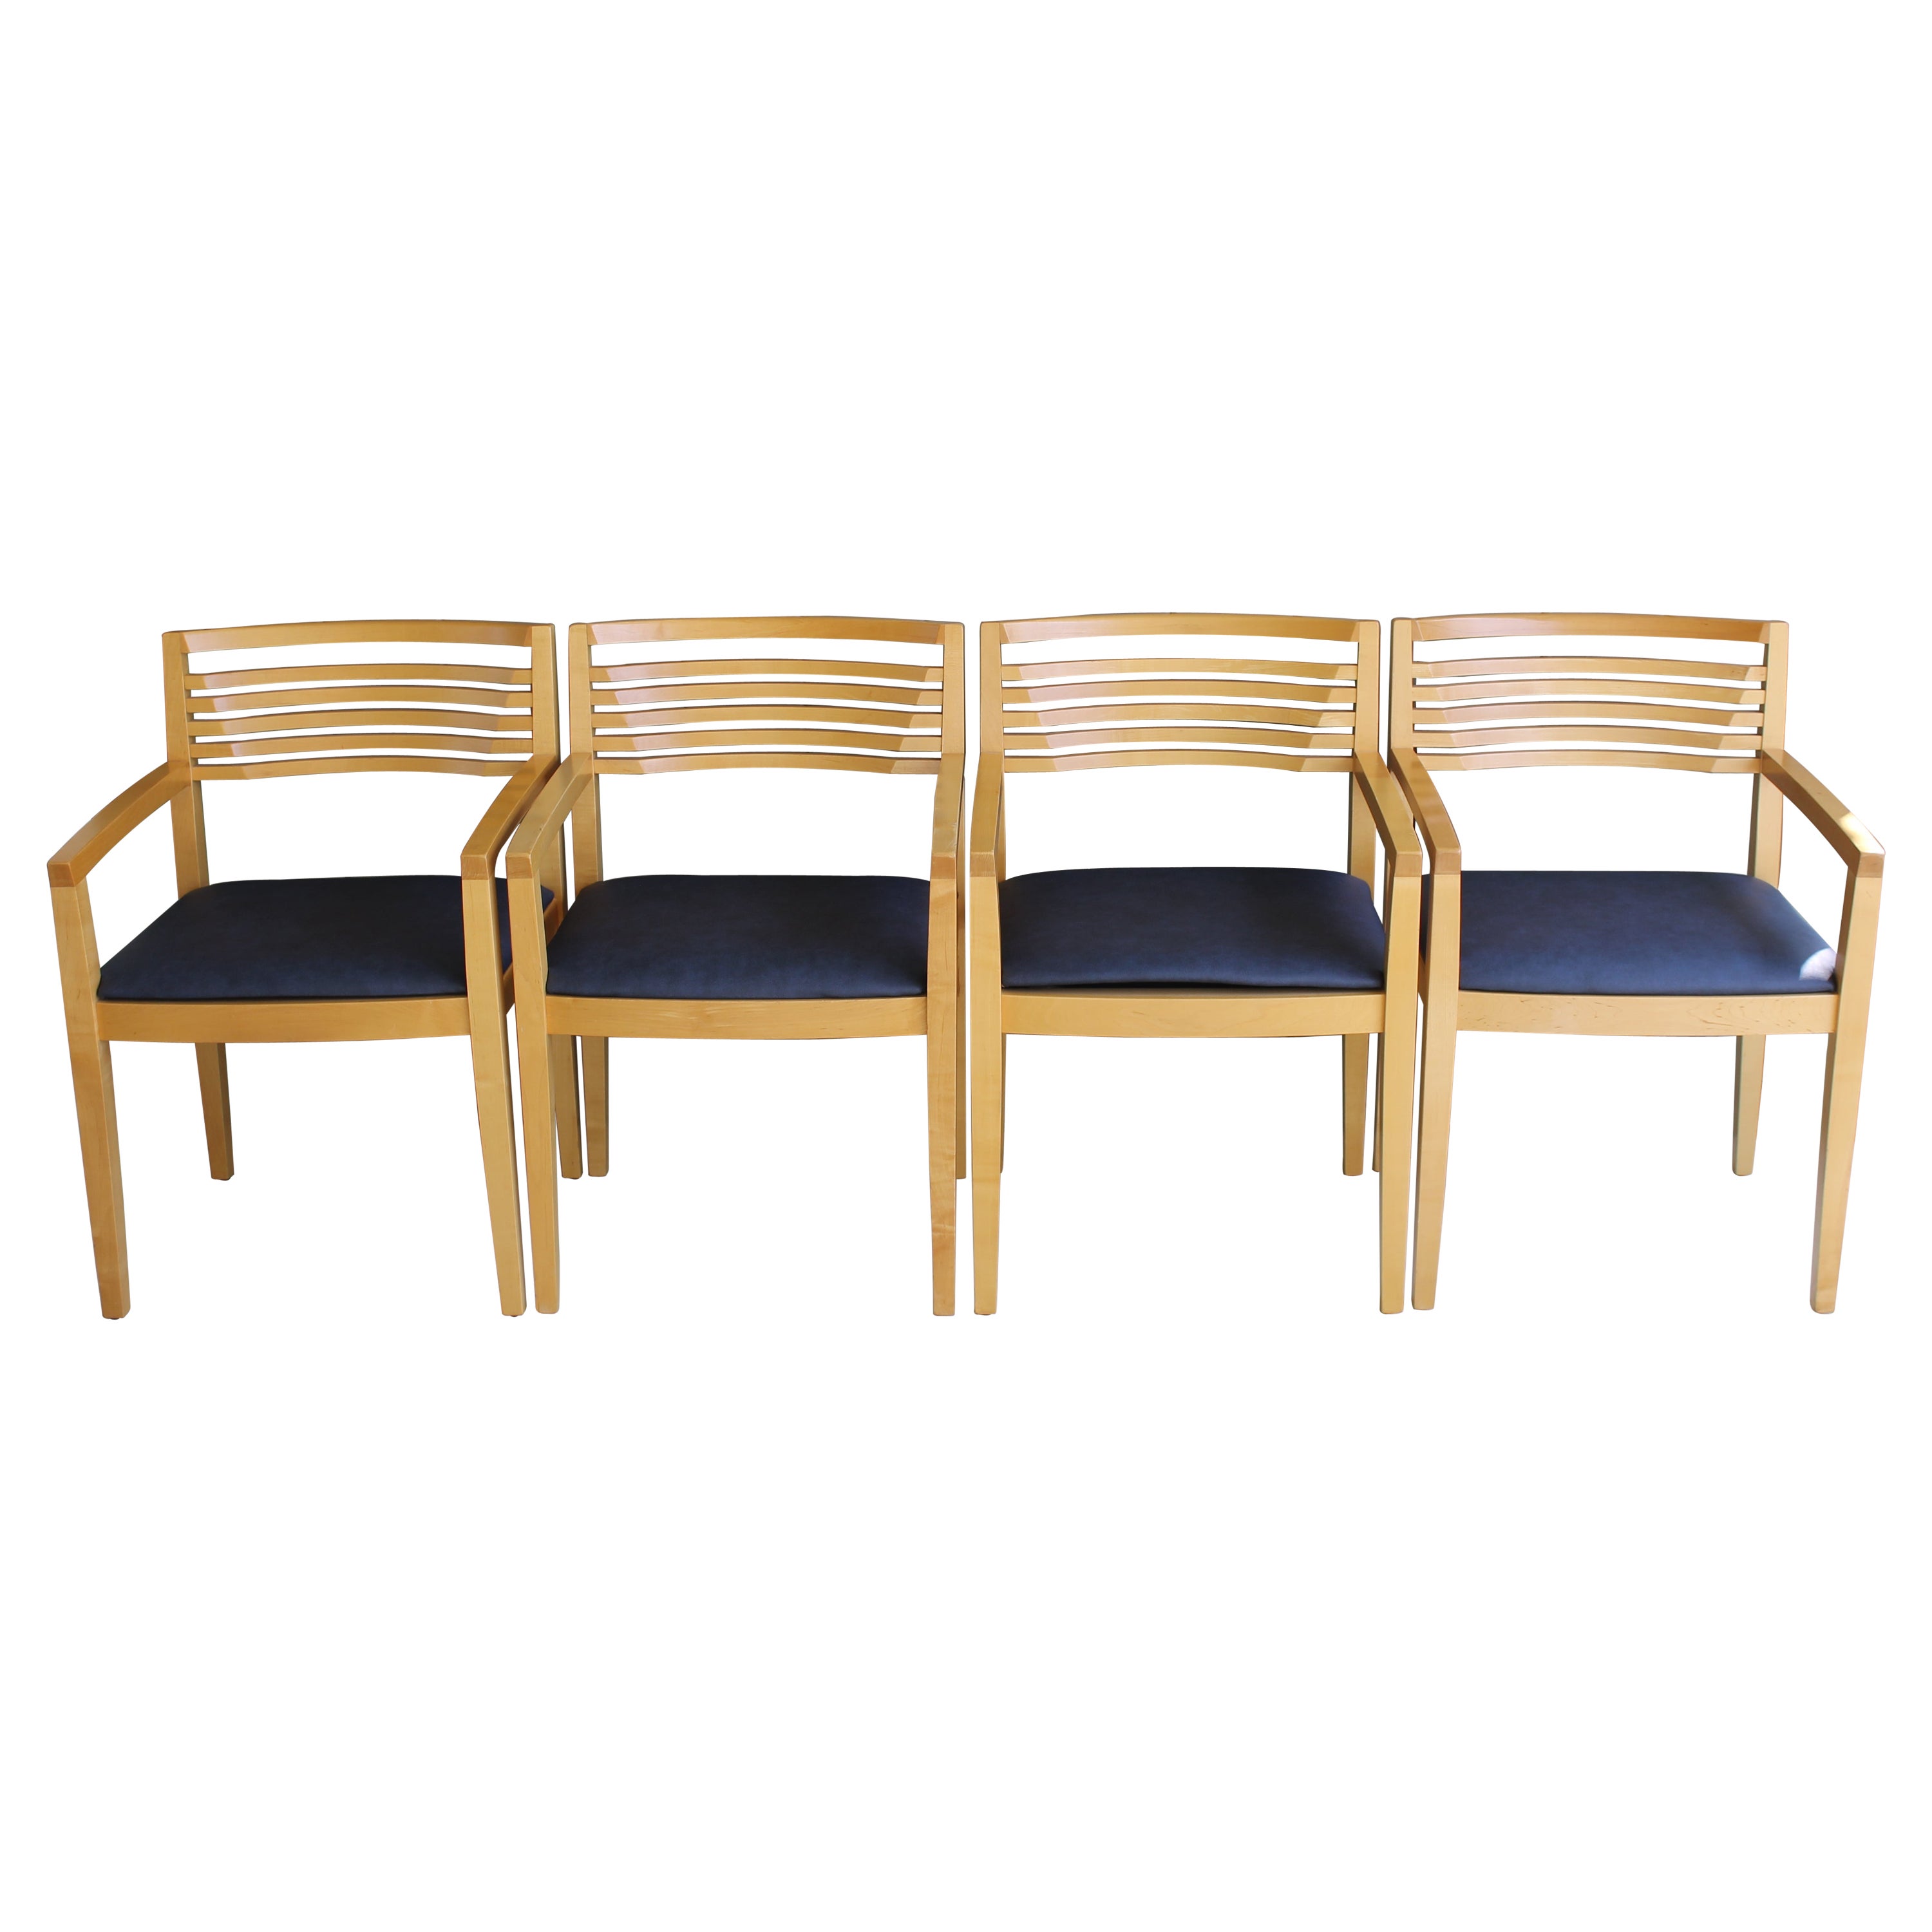 Four Dining Chairs by Joseph and Linda Ricchio for Knoll, Inc.